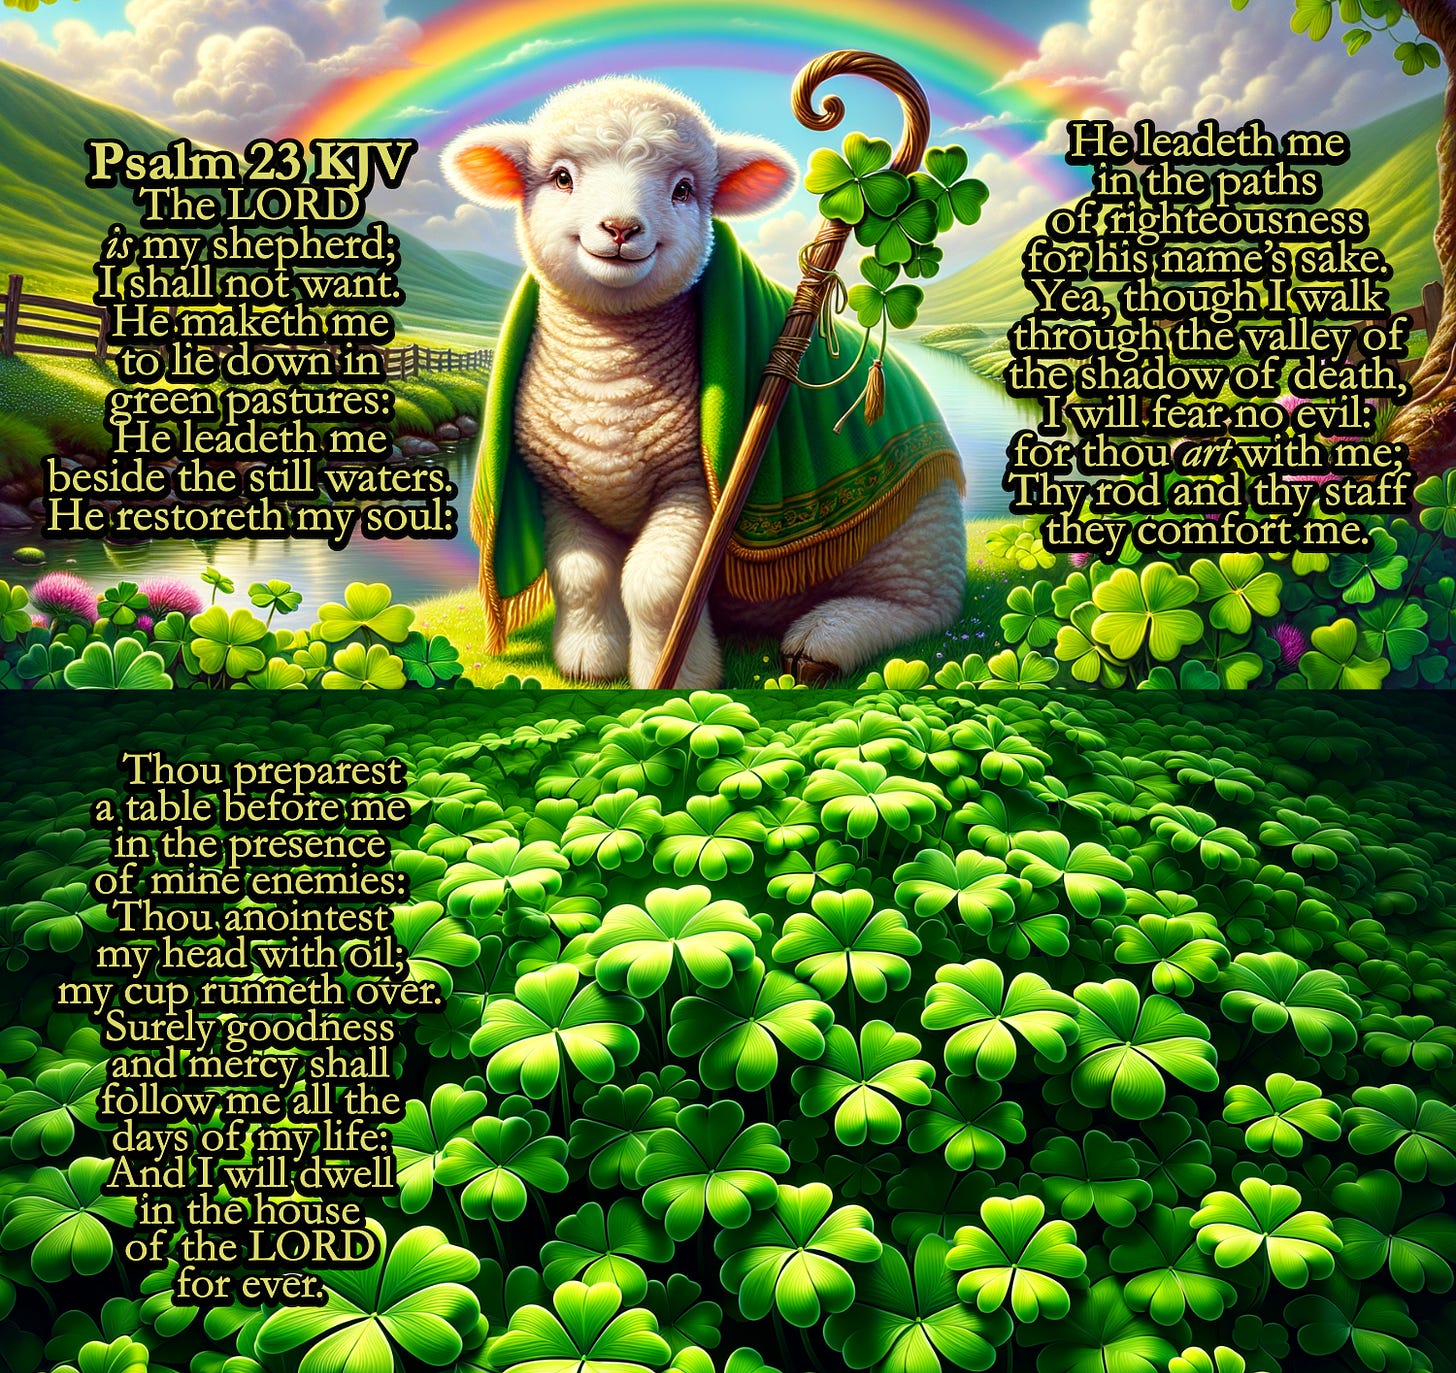 This image is a vibrant and colorful illustration that combines visual elements with text. It appears to be a religious or spiritual themed picture featuring the text of Psalm 23 from the King James Version of the Bible, laid out in an attractive, decorative font over different sections of the image.  The central figure in the image is a cute, fluffy white lamb standing on the right side. The lamb has a sweet expression, with a slight smile and soft, friendly eyes, giving it a gentle and peaceful appearance. It is wrapped in a green cloak with gold trim, which drapes over its back and around its body. The lamb is holding a shepherd's crook that also has a green and gold design, matching the cloak.  The background depicts a picturesque landscape under a bright sky with rolling hills, lush green grass, and a variety of plants. In the upper left corner, there's a rainbow arching over the hills. The image is divided by the text of the Psalm, which is placed over the sky and the hillside in the background.  The foreground is dominated by a dense carpet of green clover leaves, creating a lush field that covers the lower third of the image. The leaves are large, healthy, and have a rich green hue, contributing to the overall theme of growth and vitality.  The text itself is arranged in blocks, with different portions of the Psalm highlighted in separate areas. The font color varies from white to yellow, ensuring readability against the varied colors of the background. The entire scene emits a sense of tranquility and comfort, aligning with the themes of guidance and protection mentioned in the Psalm.